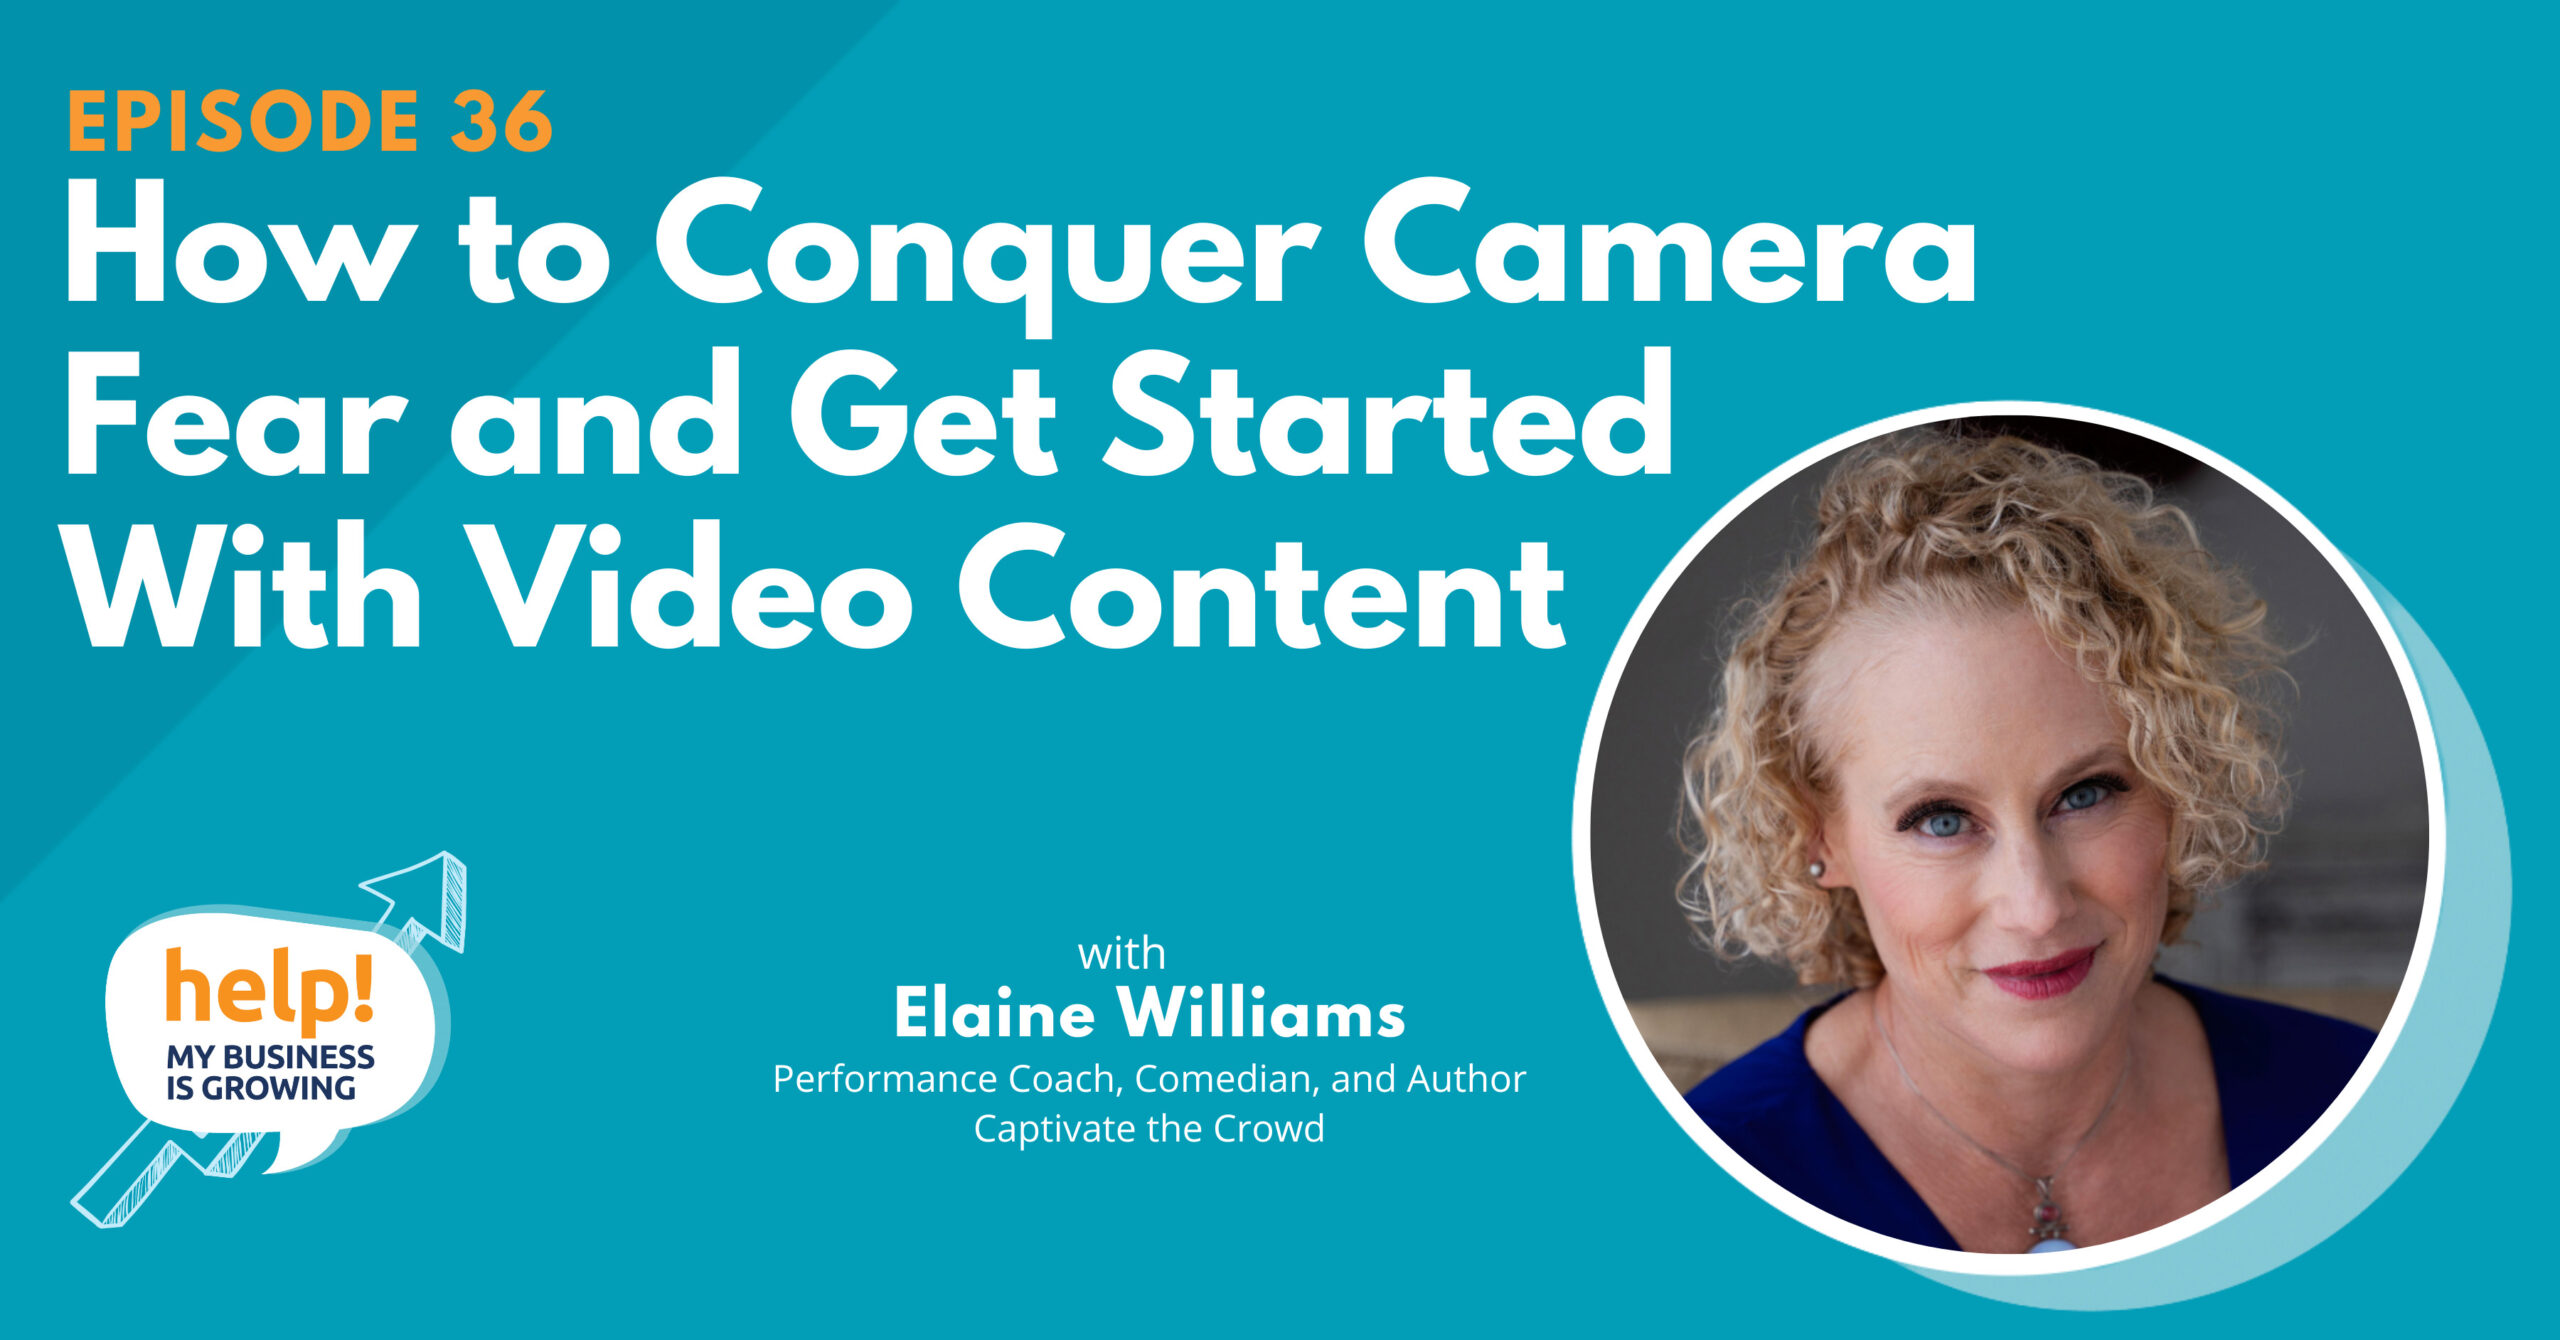 How to Conquer Camera Fear and Get Started with Video Content